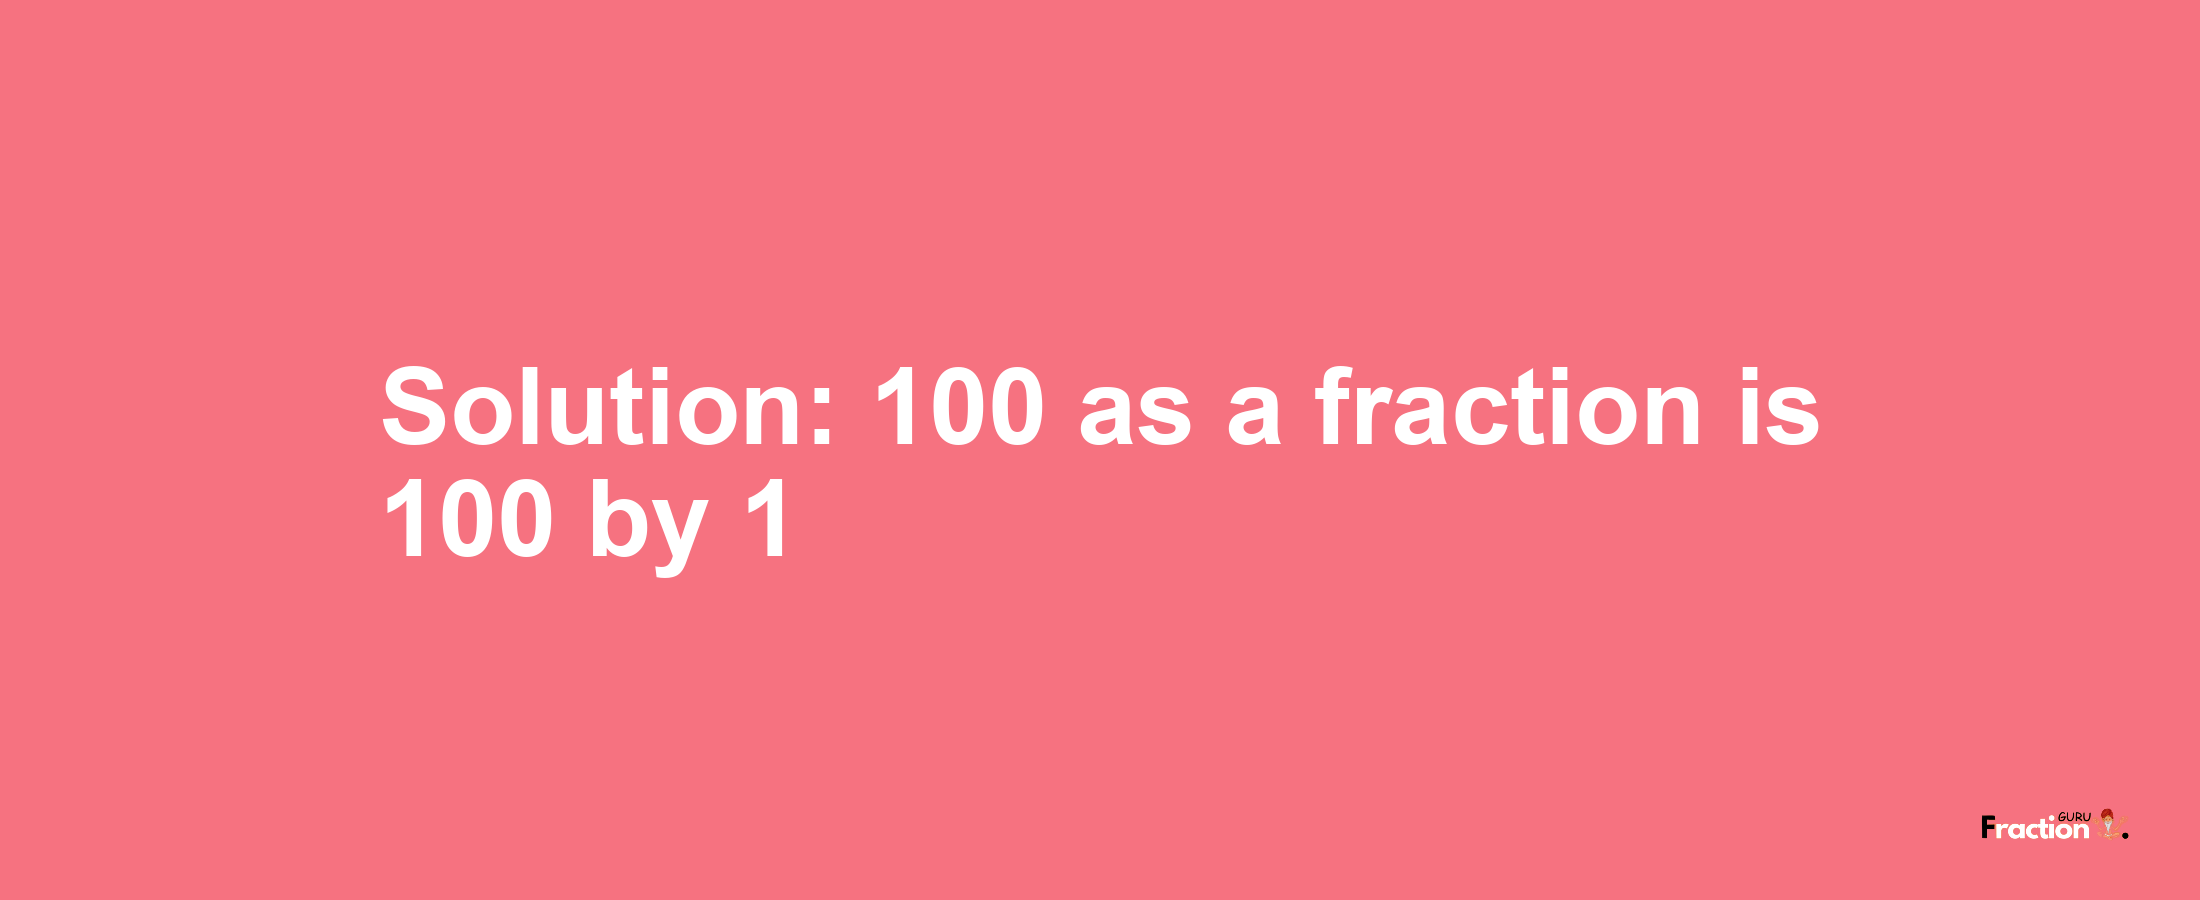 Solution:100 as a fraction is 100/1